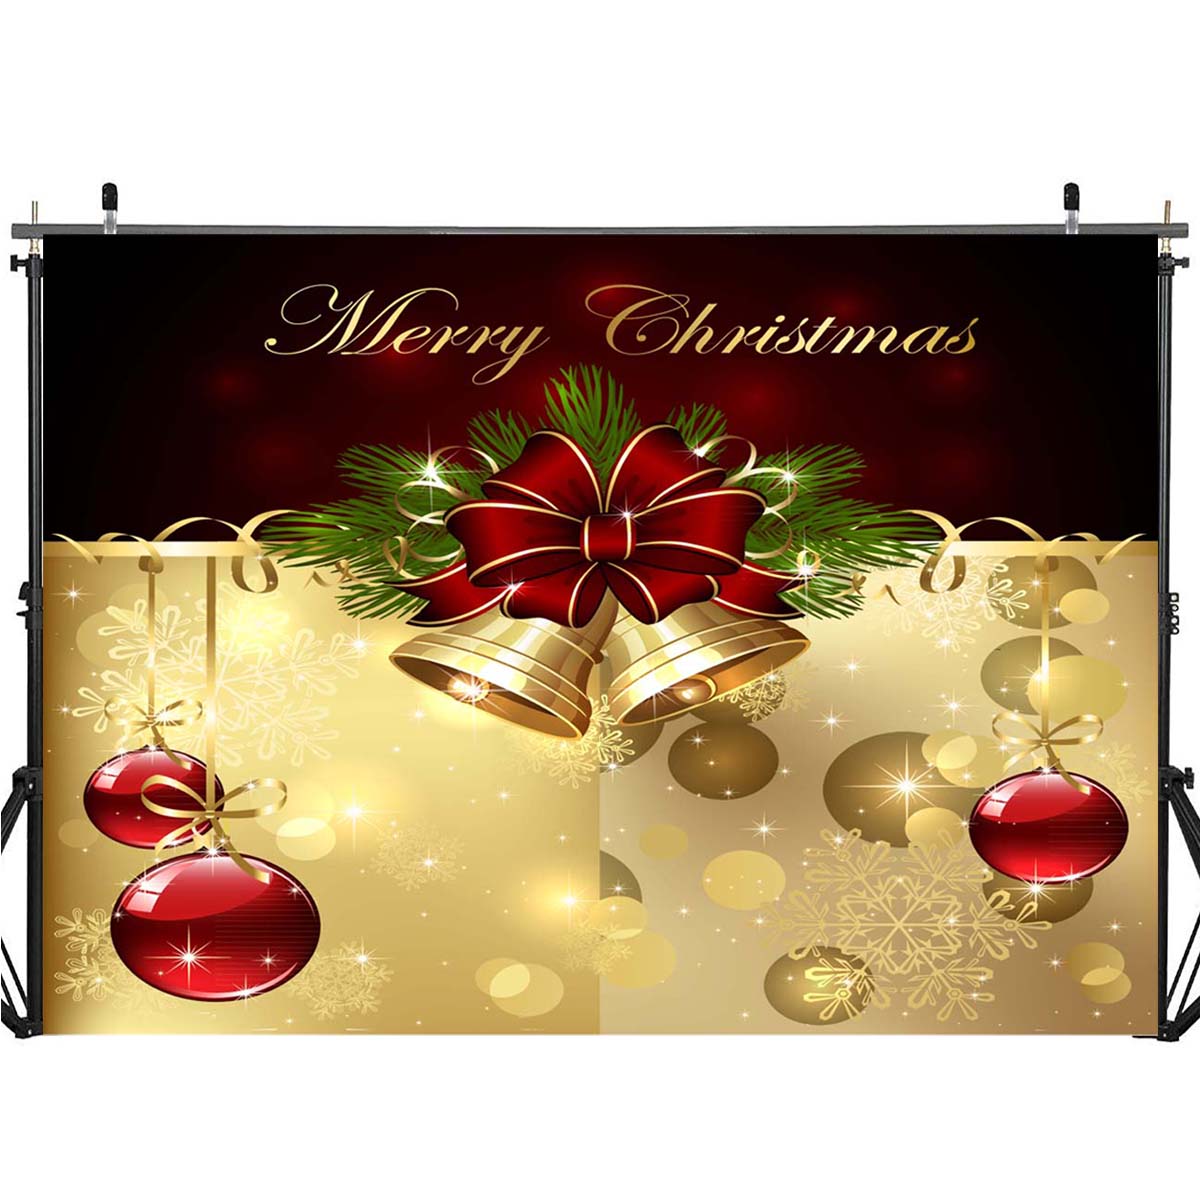 5x7FT-Vinyl-Merry-Christmas-Golded-Bell-Ring-Photography-Backdrop-Background-Studio-Prop-1574724-1